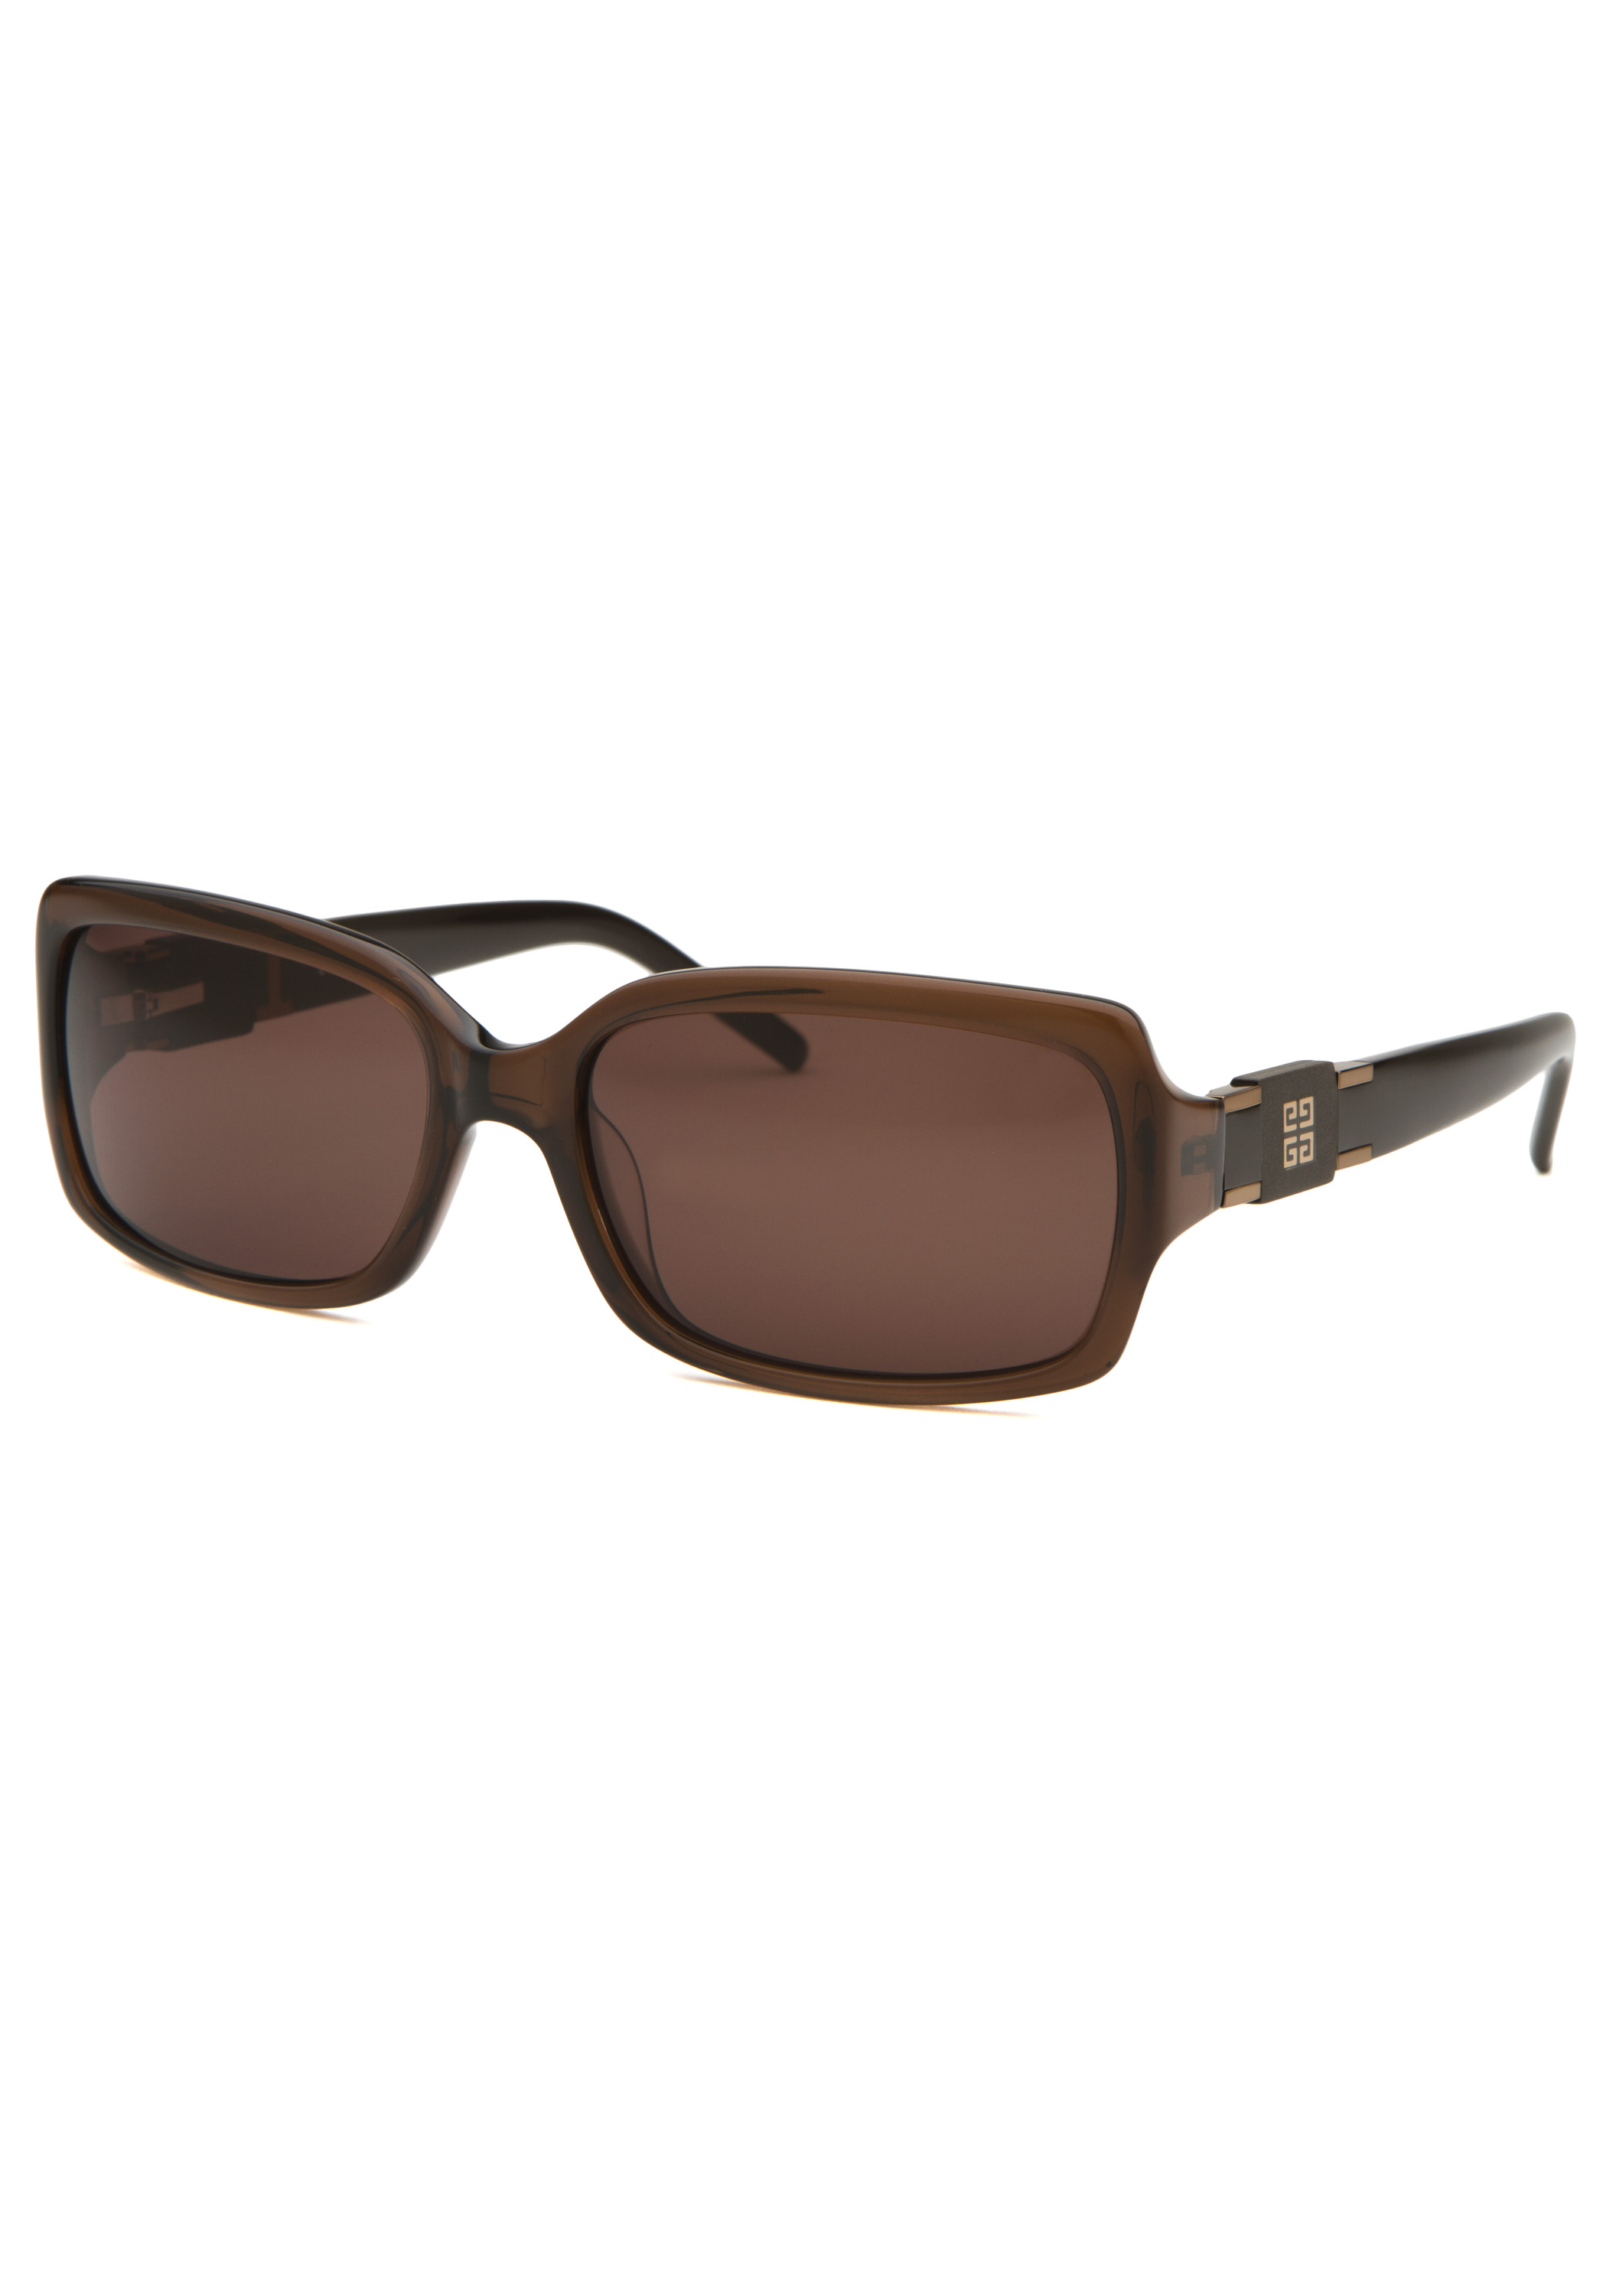 Givenchy Women's Rectangle Brown Sunglasses